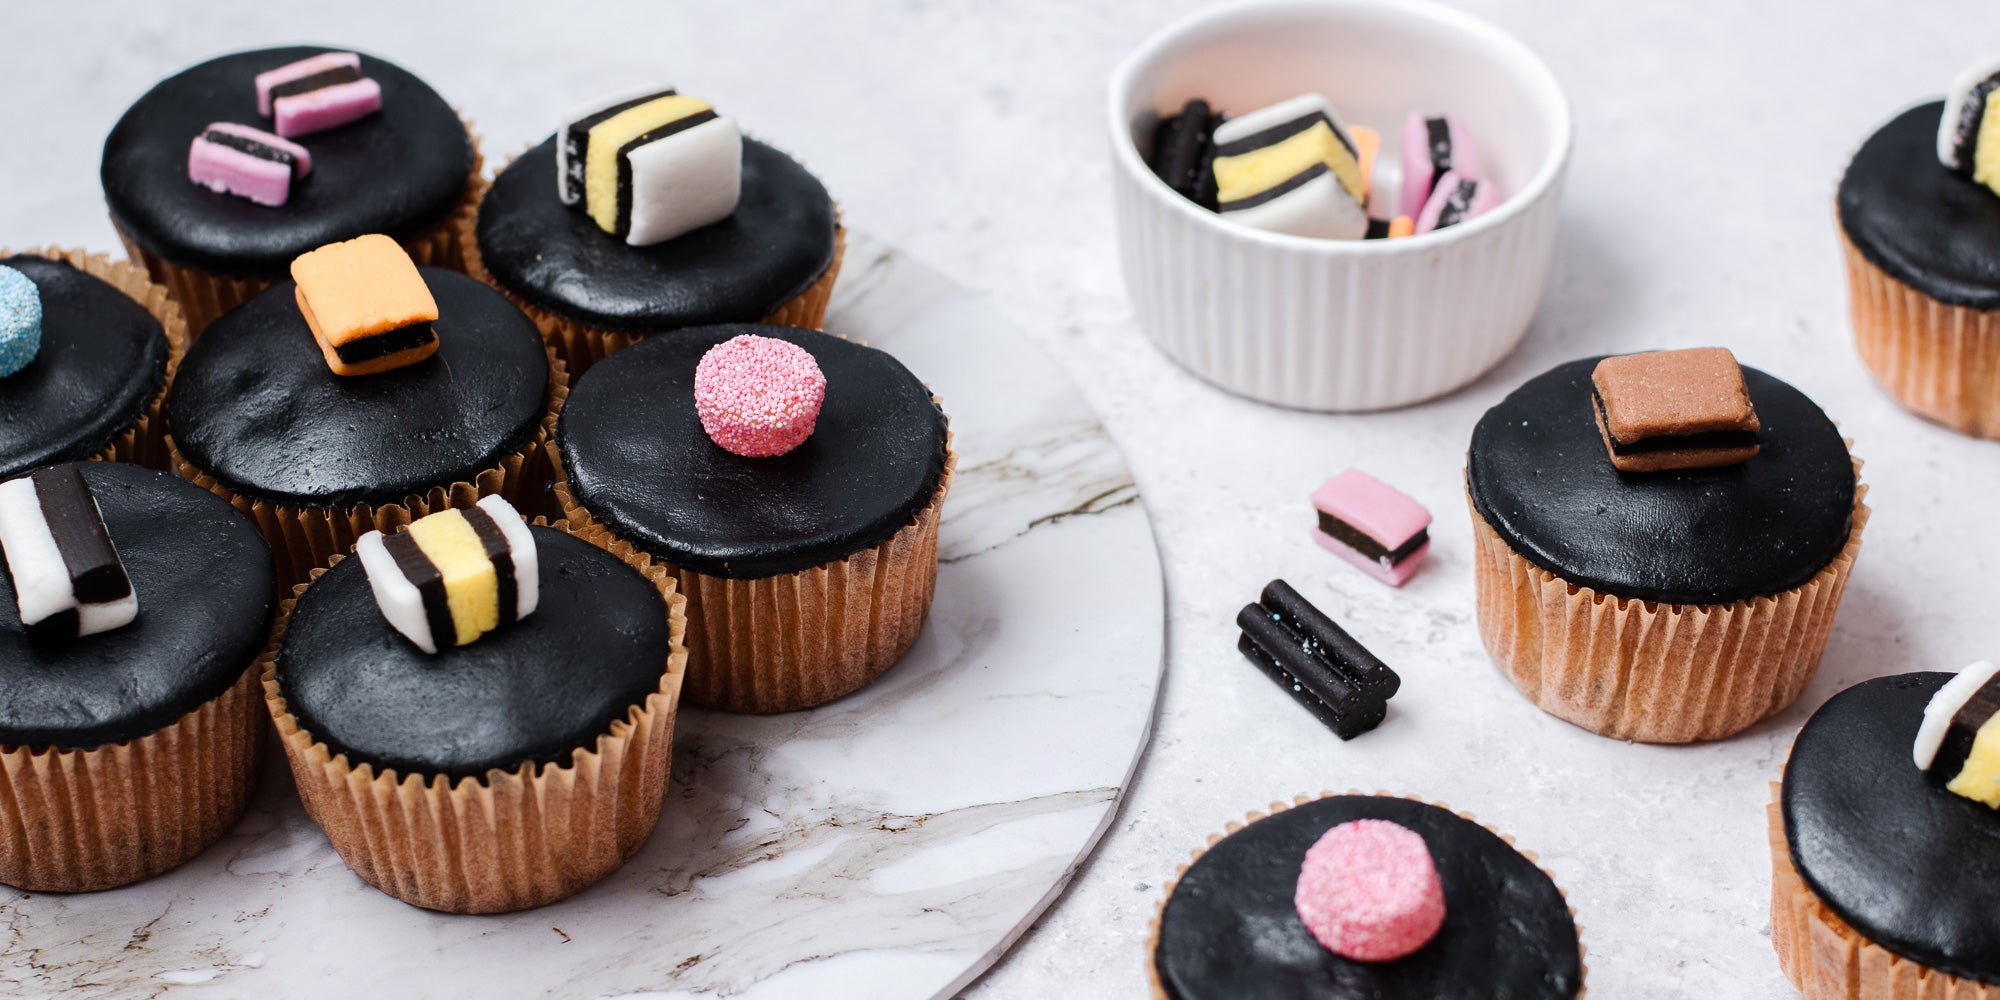 Cupcakes in brown cases, black fondant, topped with liquorice allsorts. Bowl of sweets 